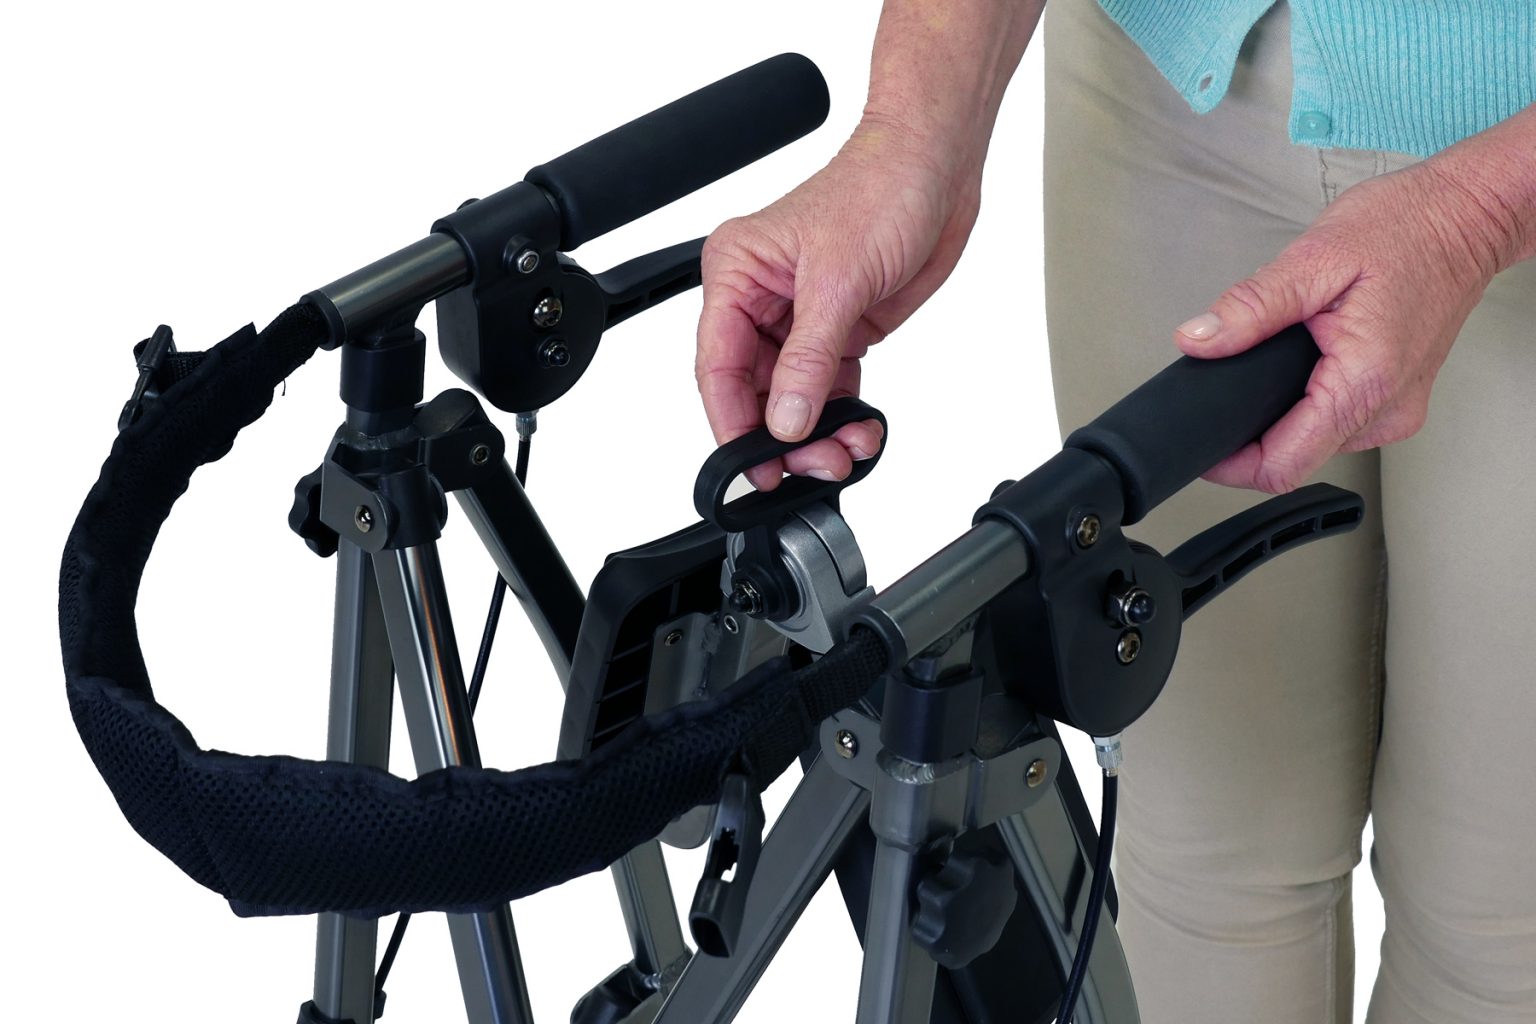 space saver rollator with seat